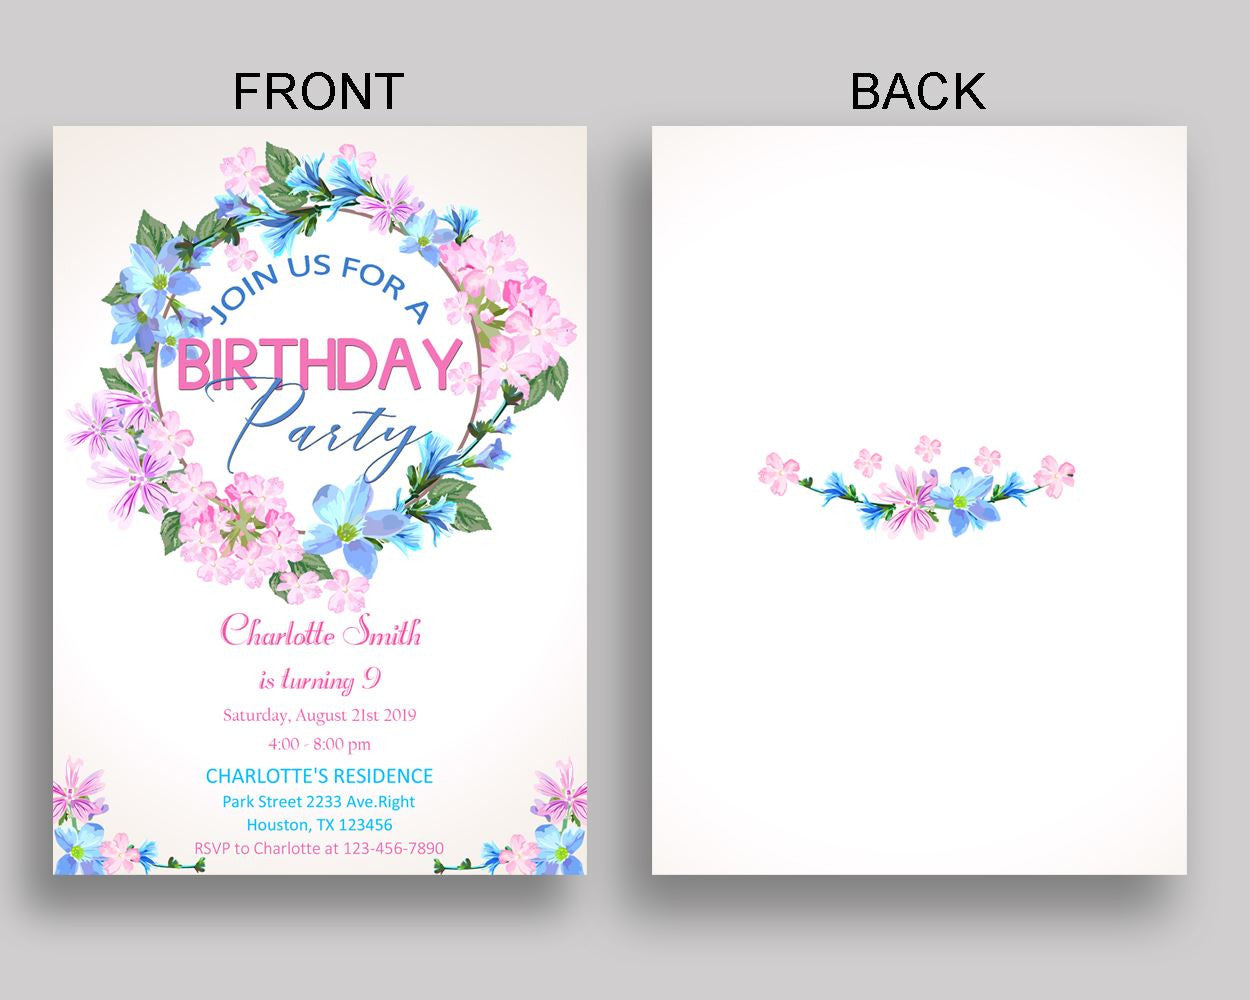 Floral Wreath Birthday Invitation Floral Wreath Birthday Party Invitation Floral Wreath Birthday Party Floral Wreath Invitation Girl 9MD18 - Digital Product